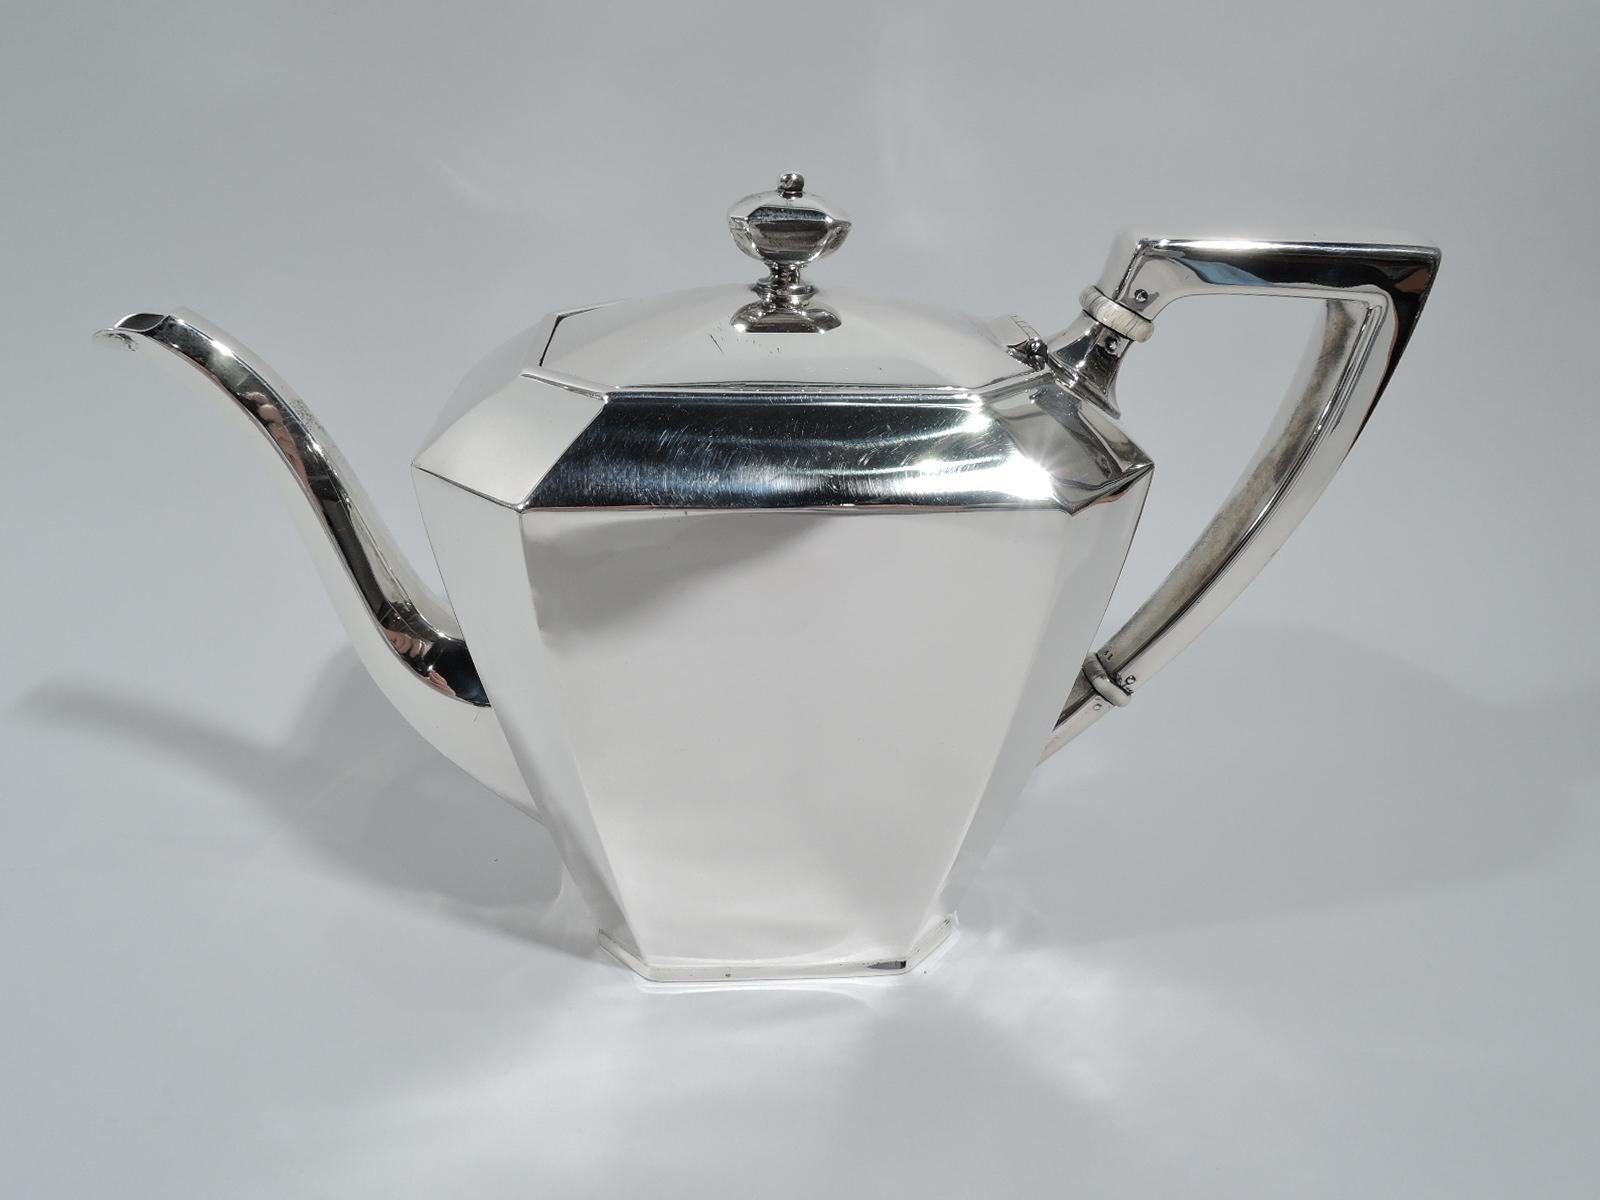 Fairfax sterling silver coffee and tea set. Made by Gorham and Durgin (part of Gorham) in Providence, ca 1940. This set comprises 5 pieces: Coffeepot, teapot, creamer, sugar, and waste bowl.

Each: Straight and tapering body with chamfered